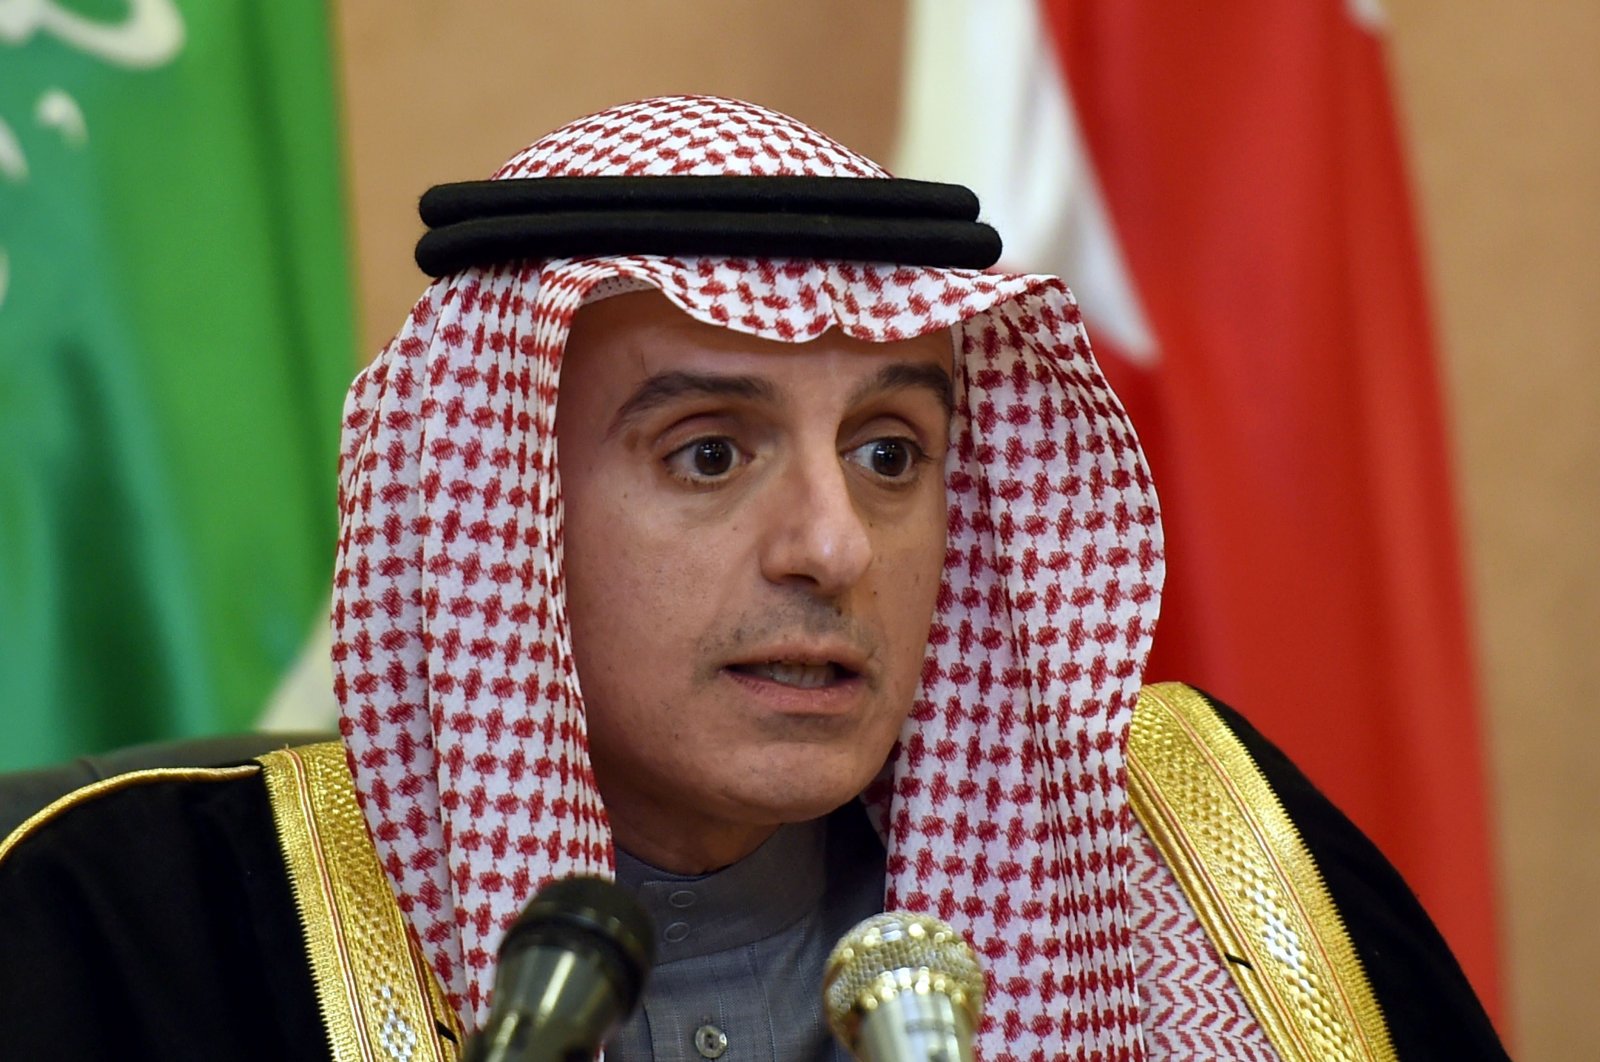 Saudi Arabia's Foreign Minister Adel al-Jubeir speaks during a press meeting with foreign ministers of the GCC in the Saudi capital Riyadh, Dec. 10, 2015. (AFP Photo)